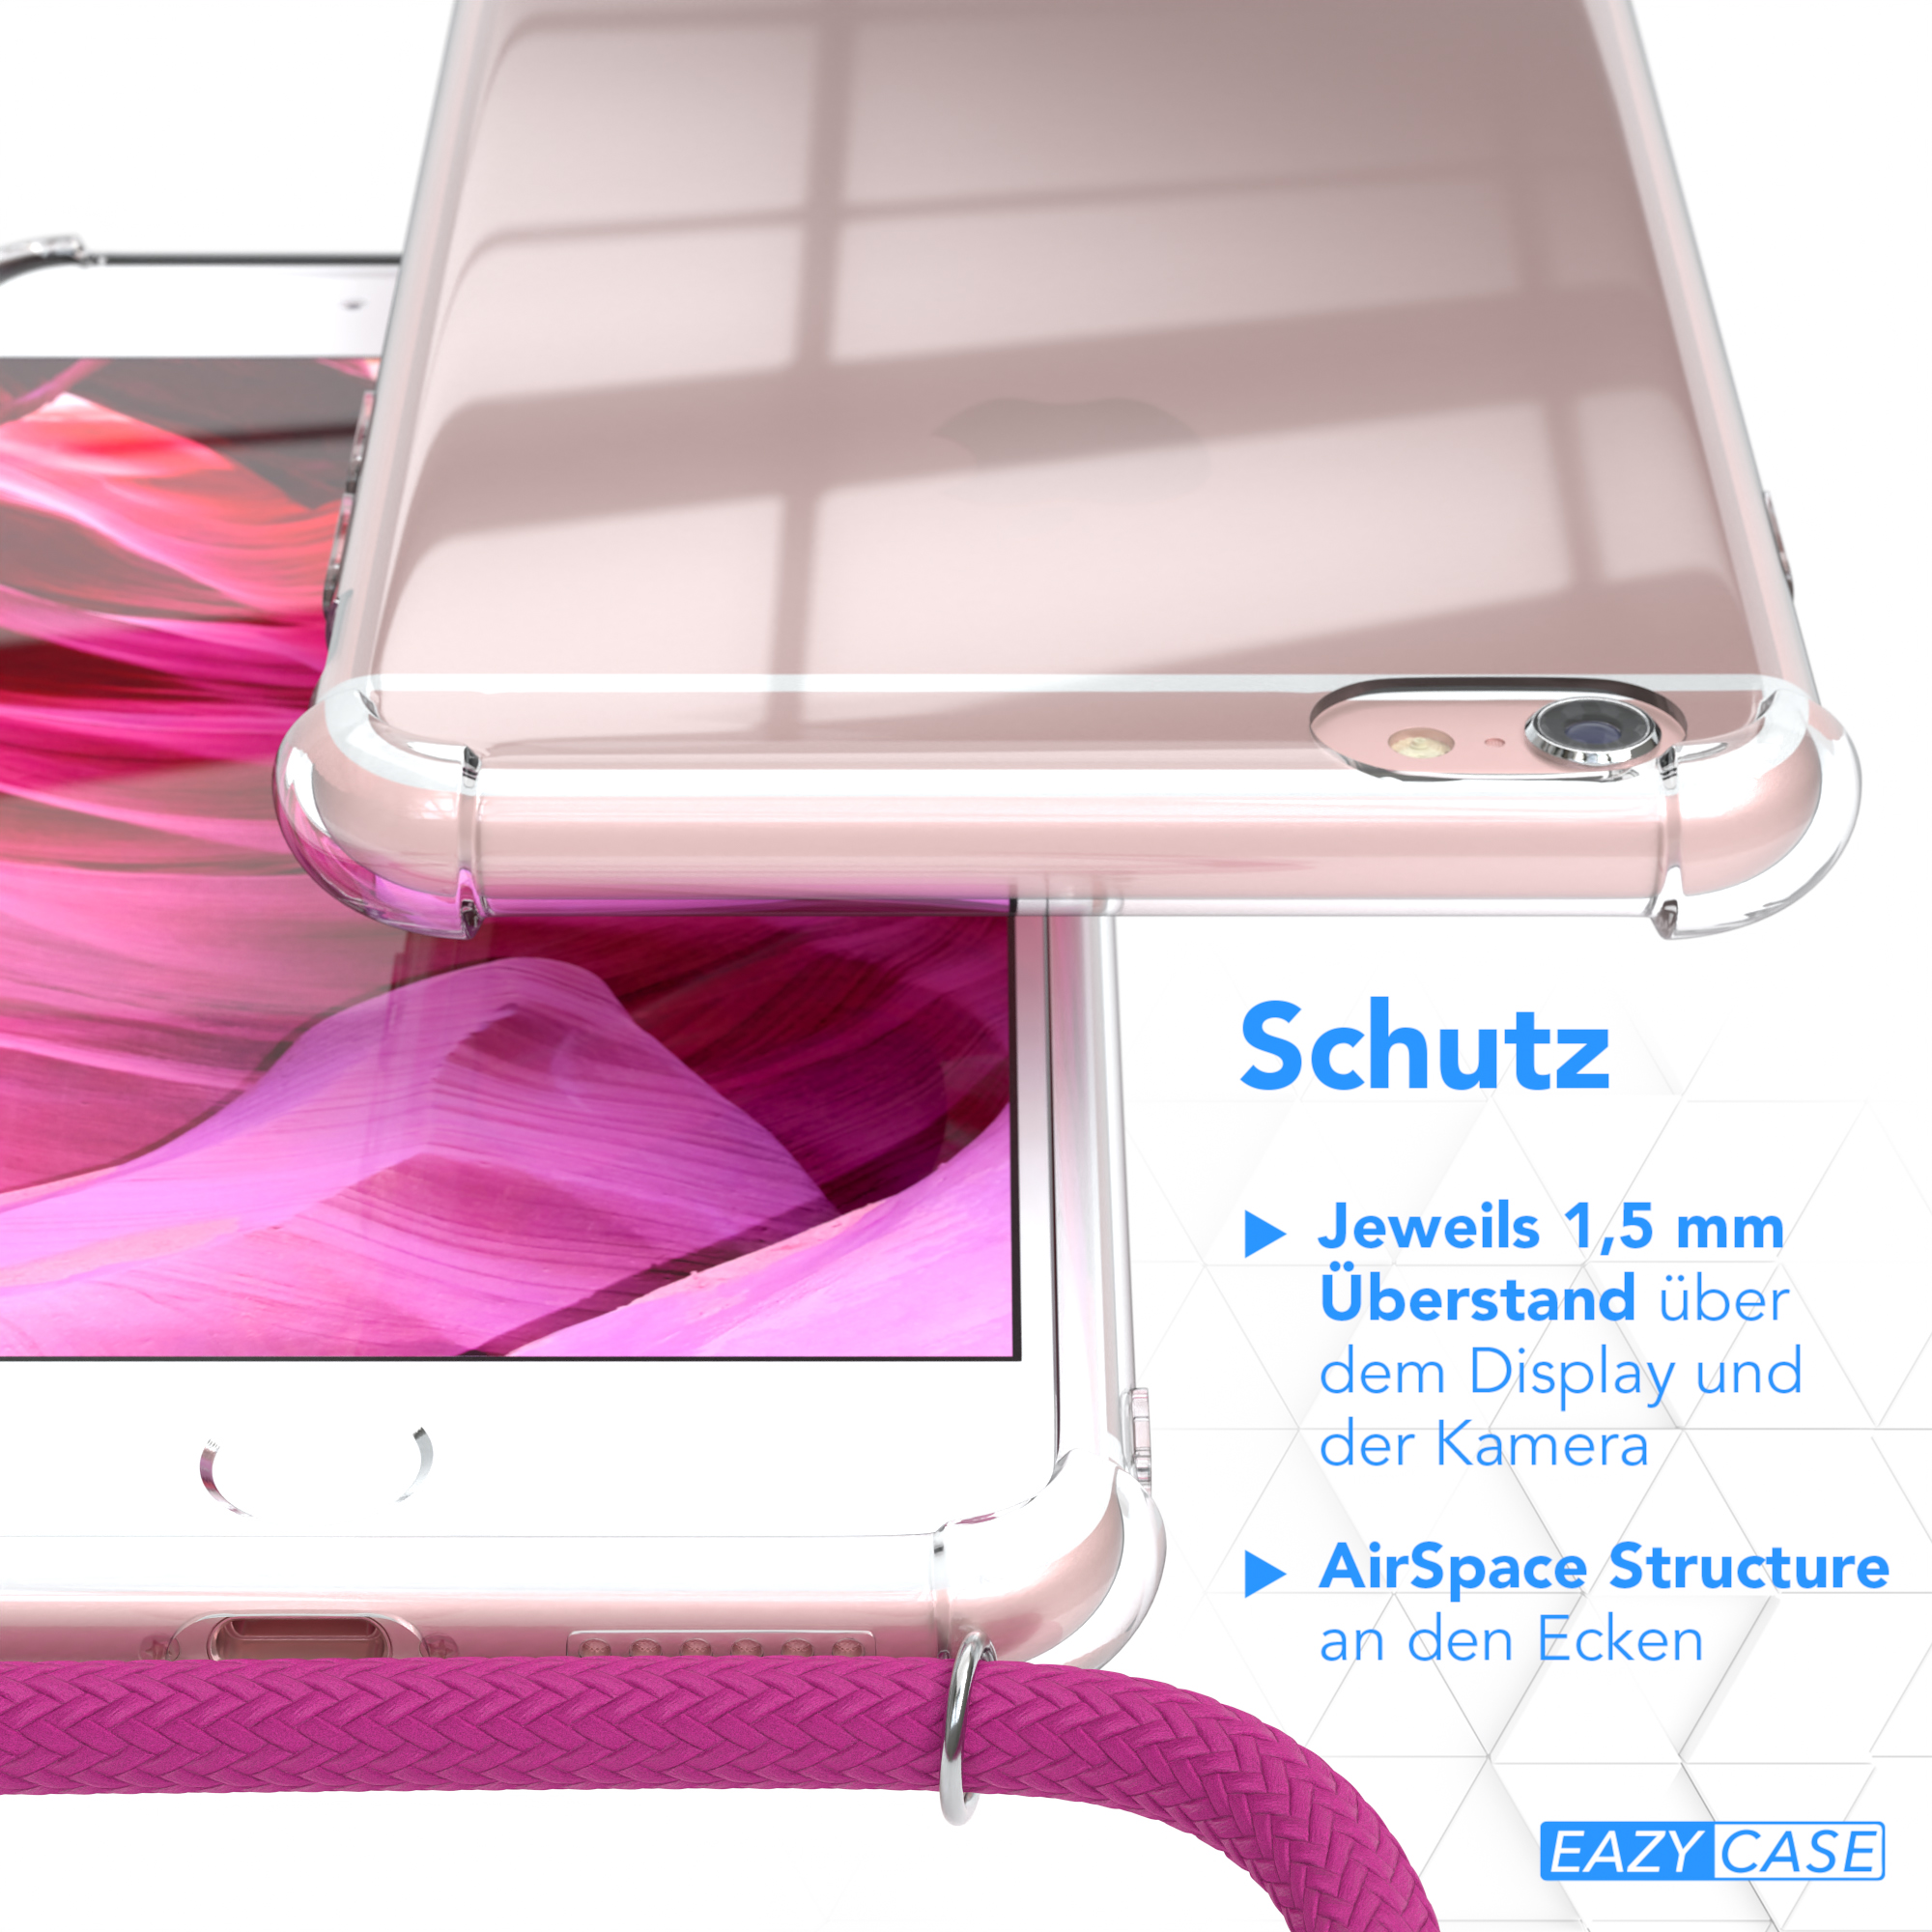 Cover / Silber EAZY Clear 6 6S, mit Apple, / iPhone Pink Umhängeband, Clips Umhängetasche, CASE